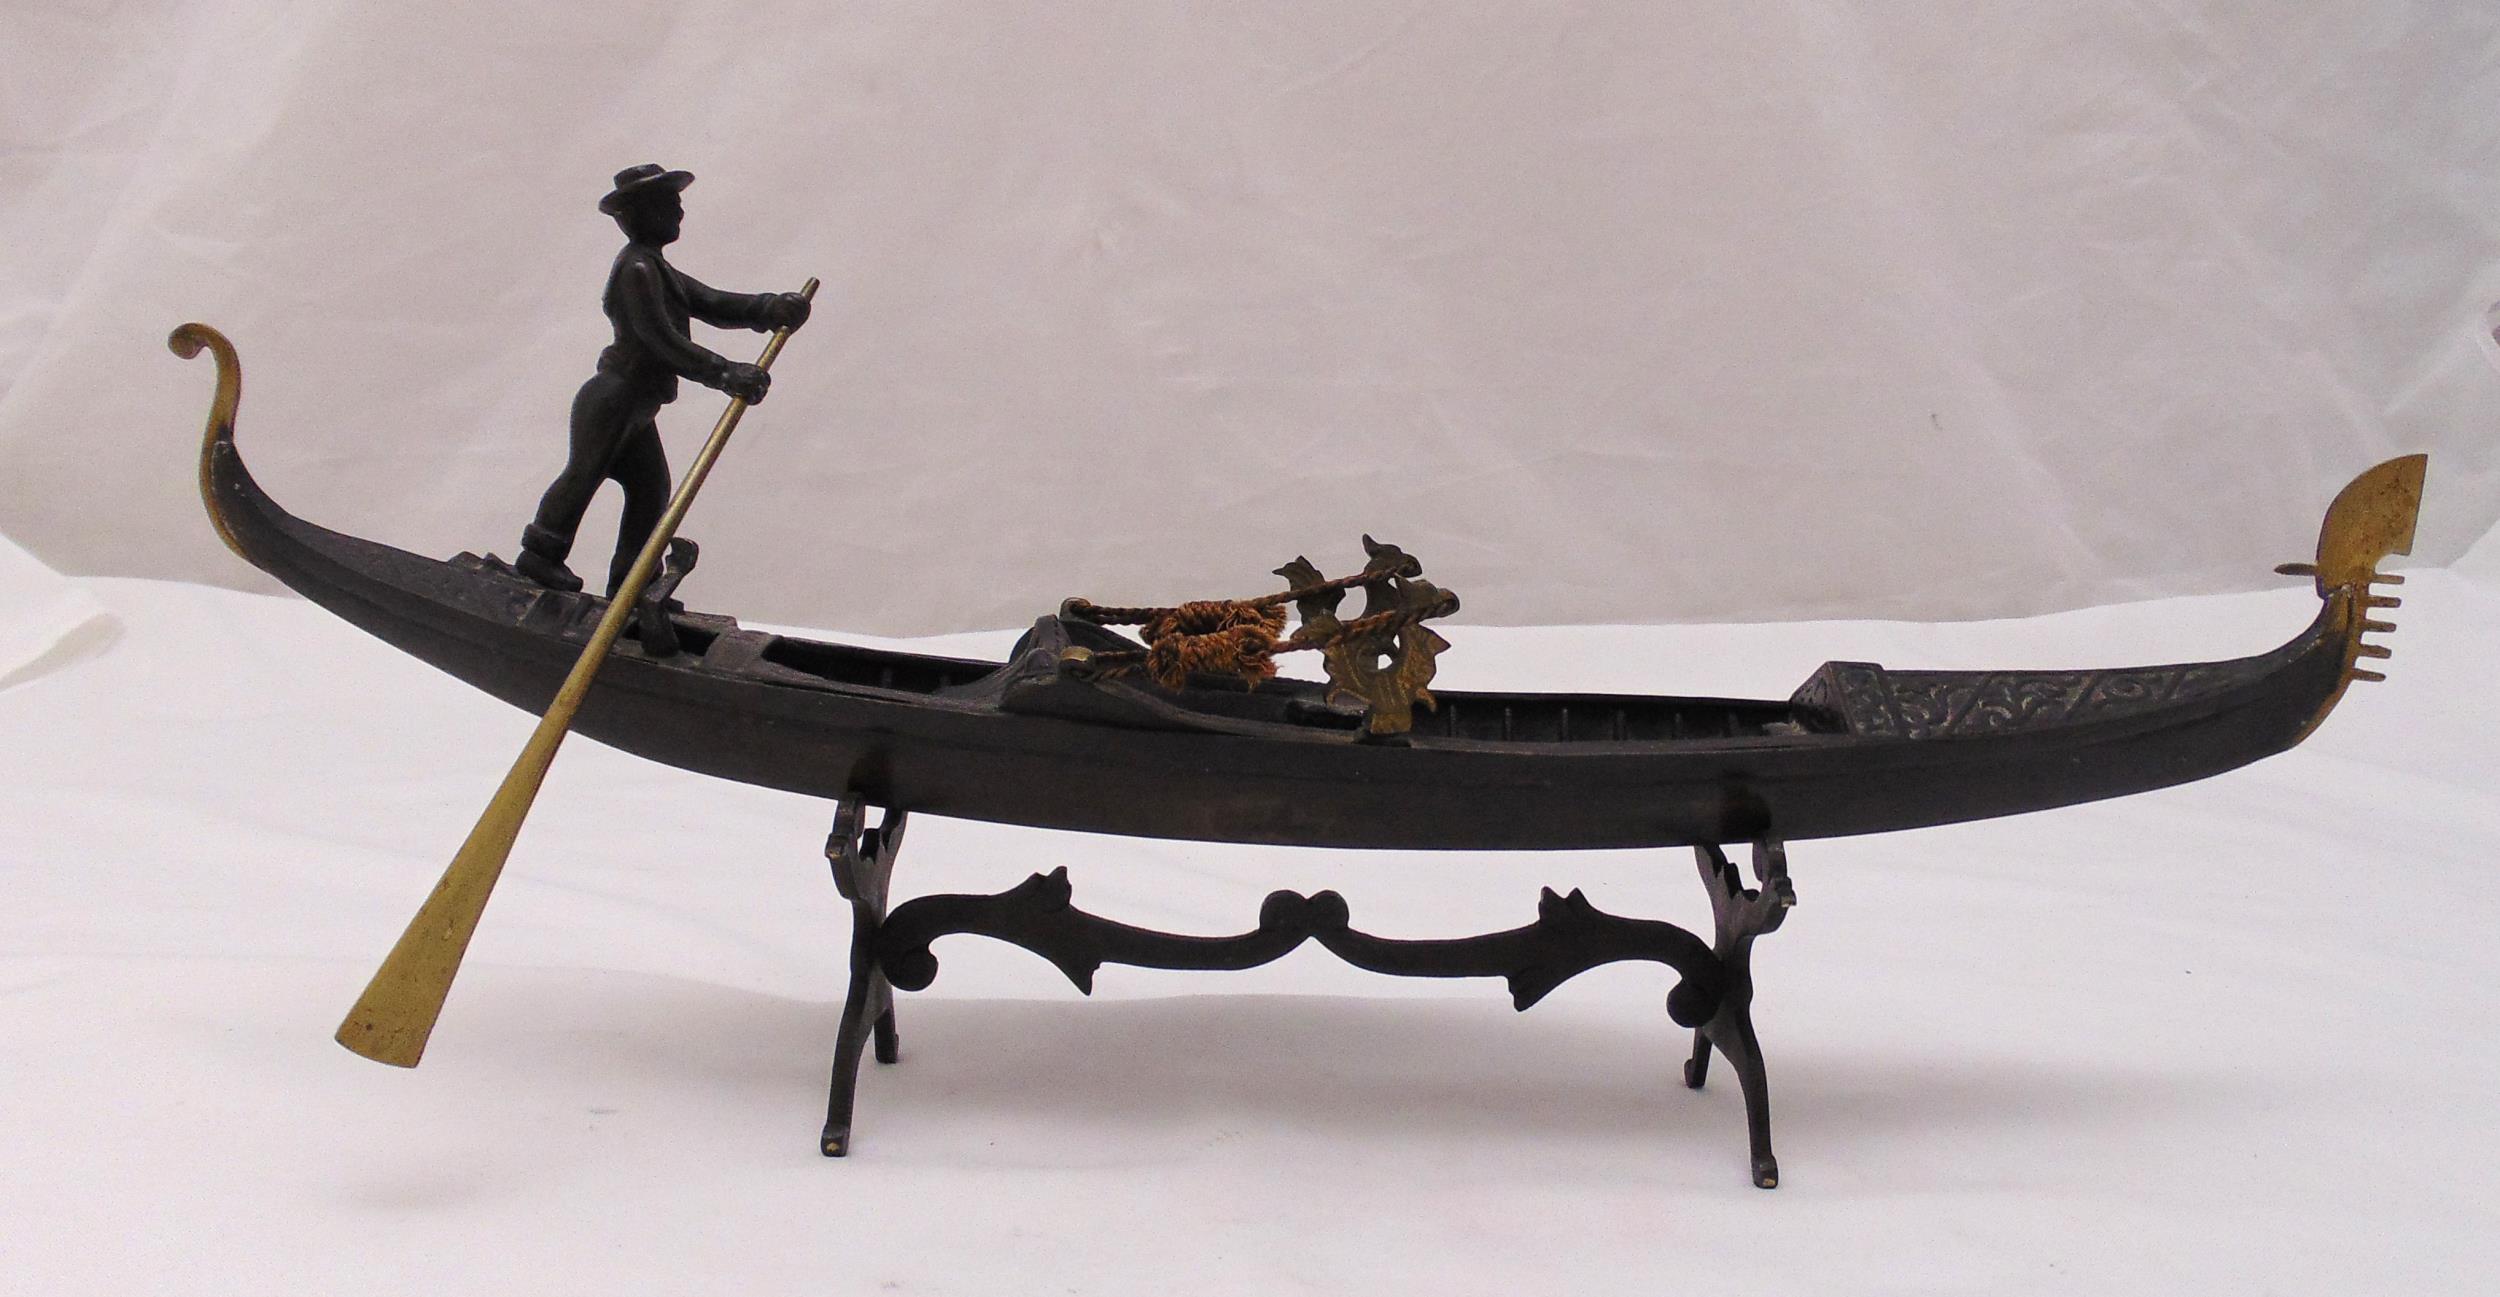 An early 20th century bronze model of a gondola and gondolier, stamped Ricordo Di Venezia, on